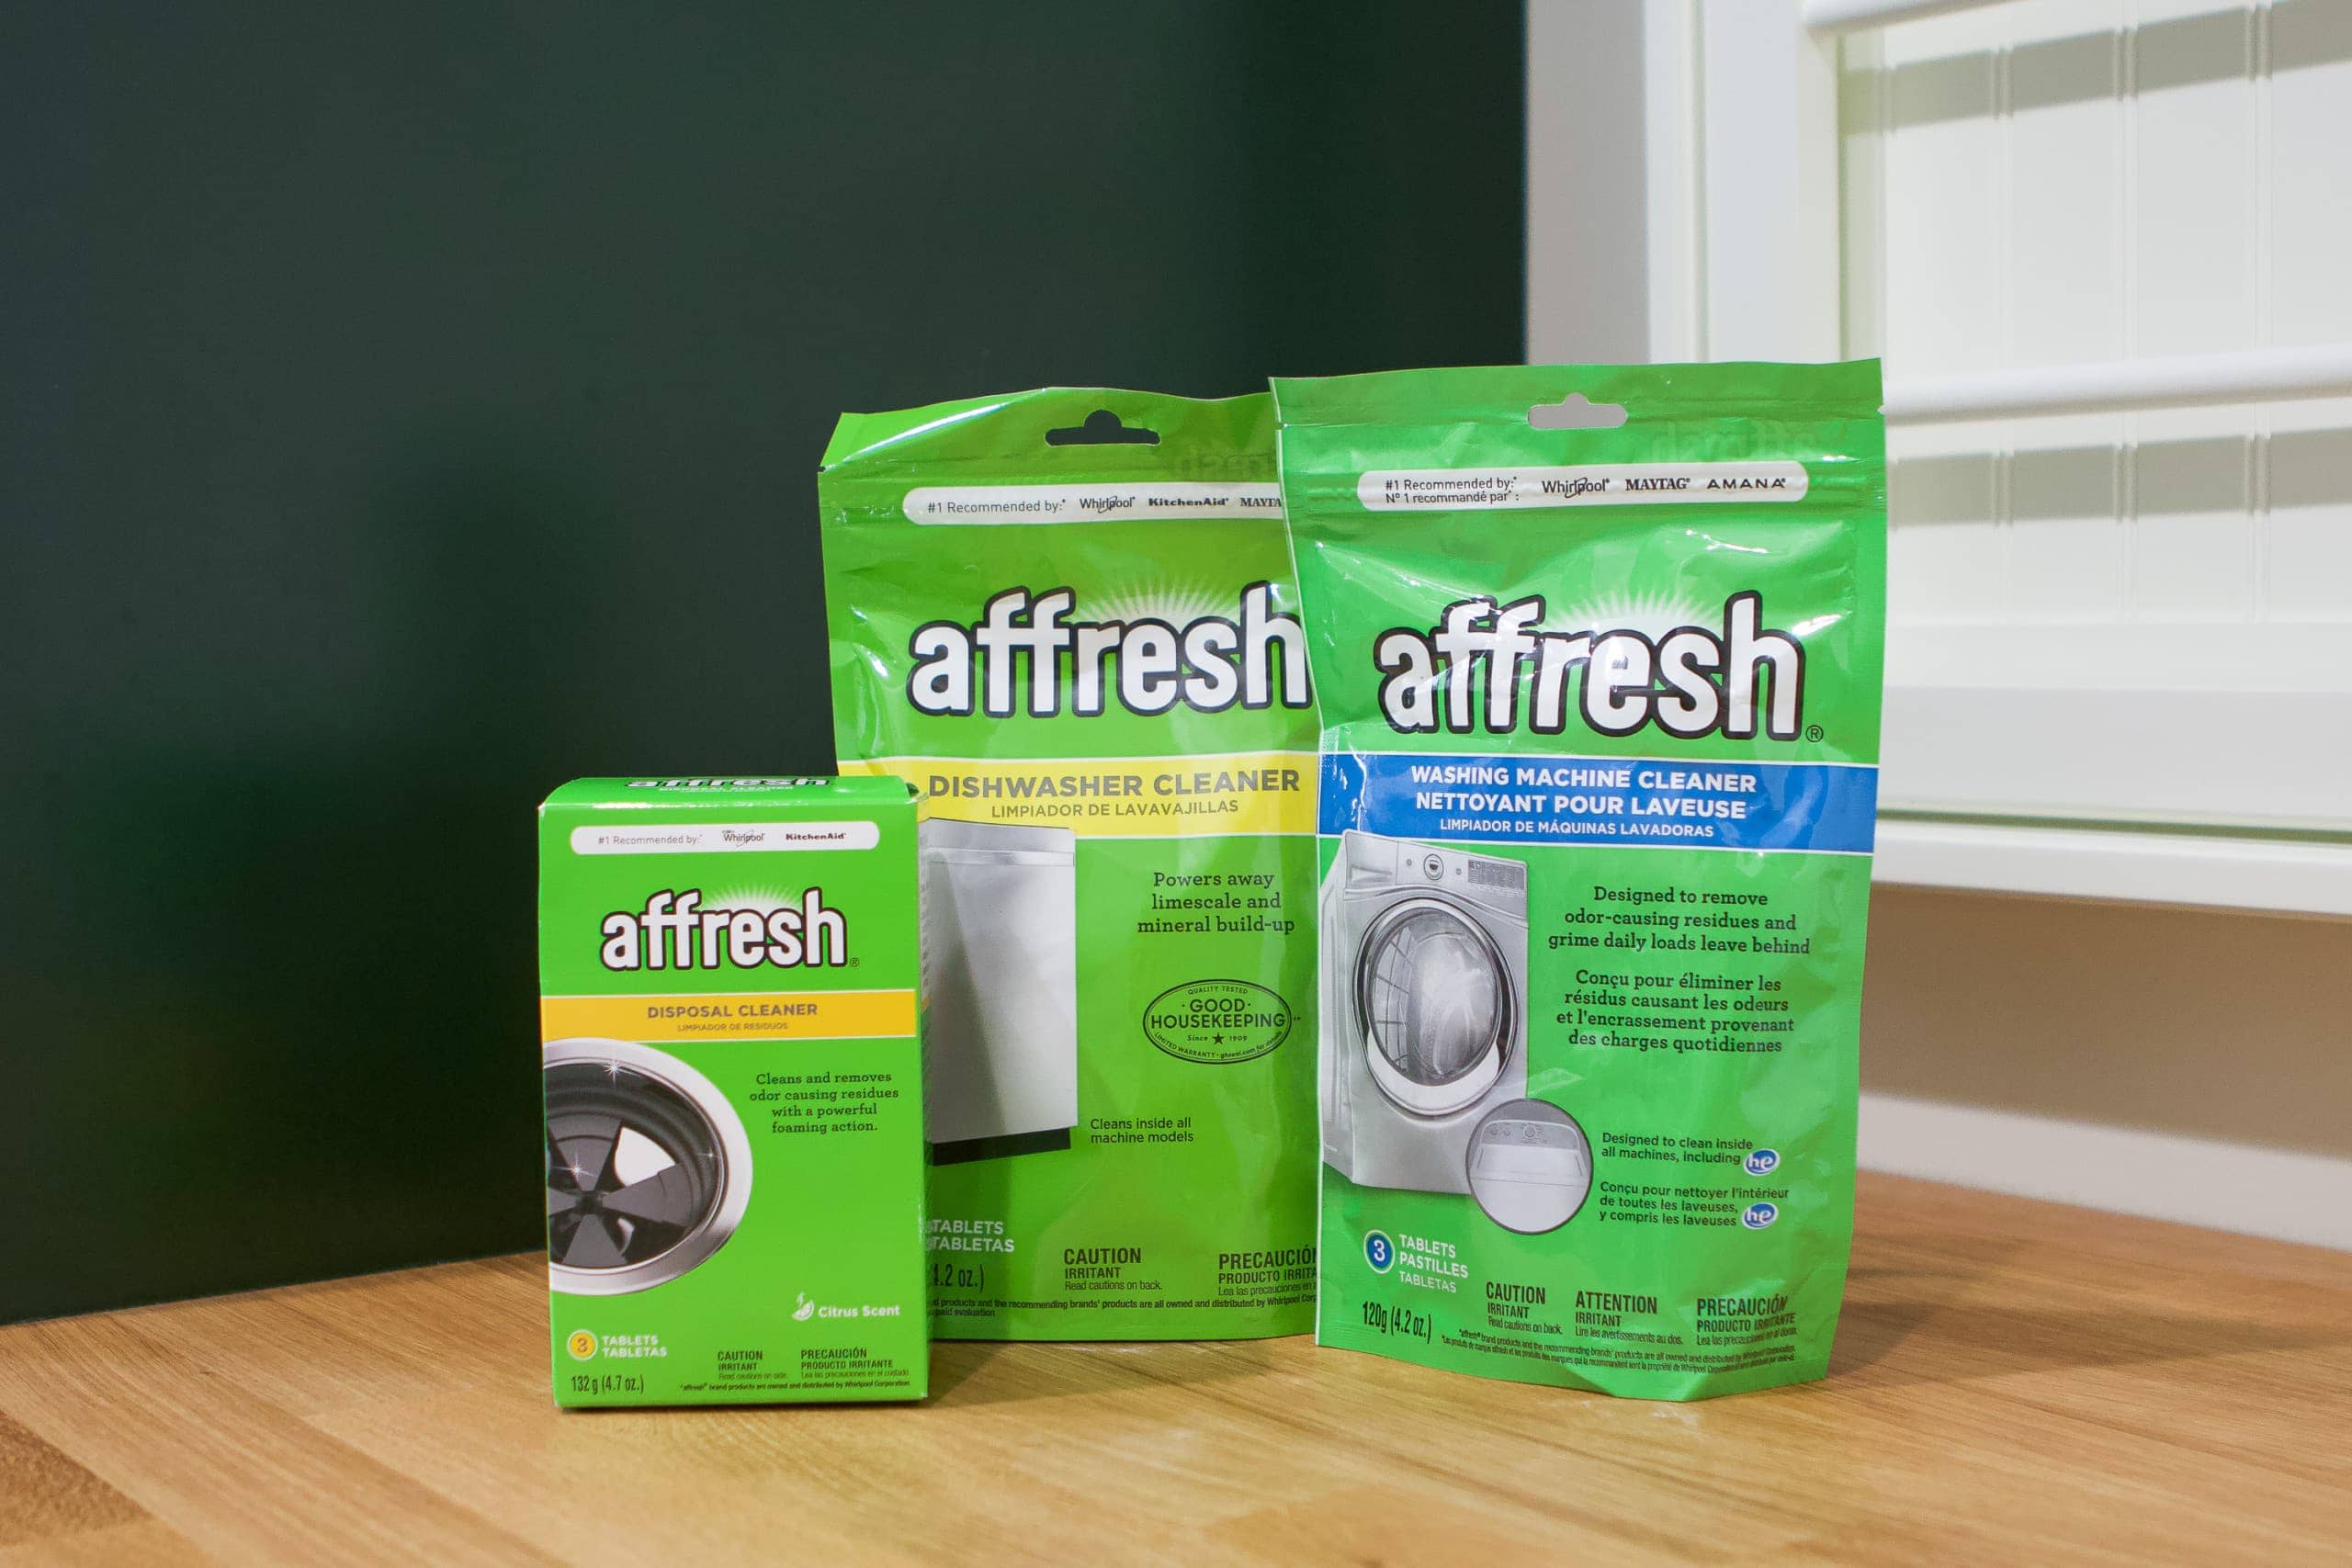 Other affresh products for cleaning appliances